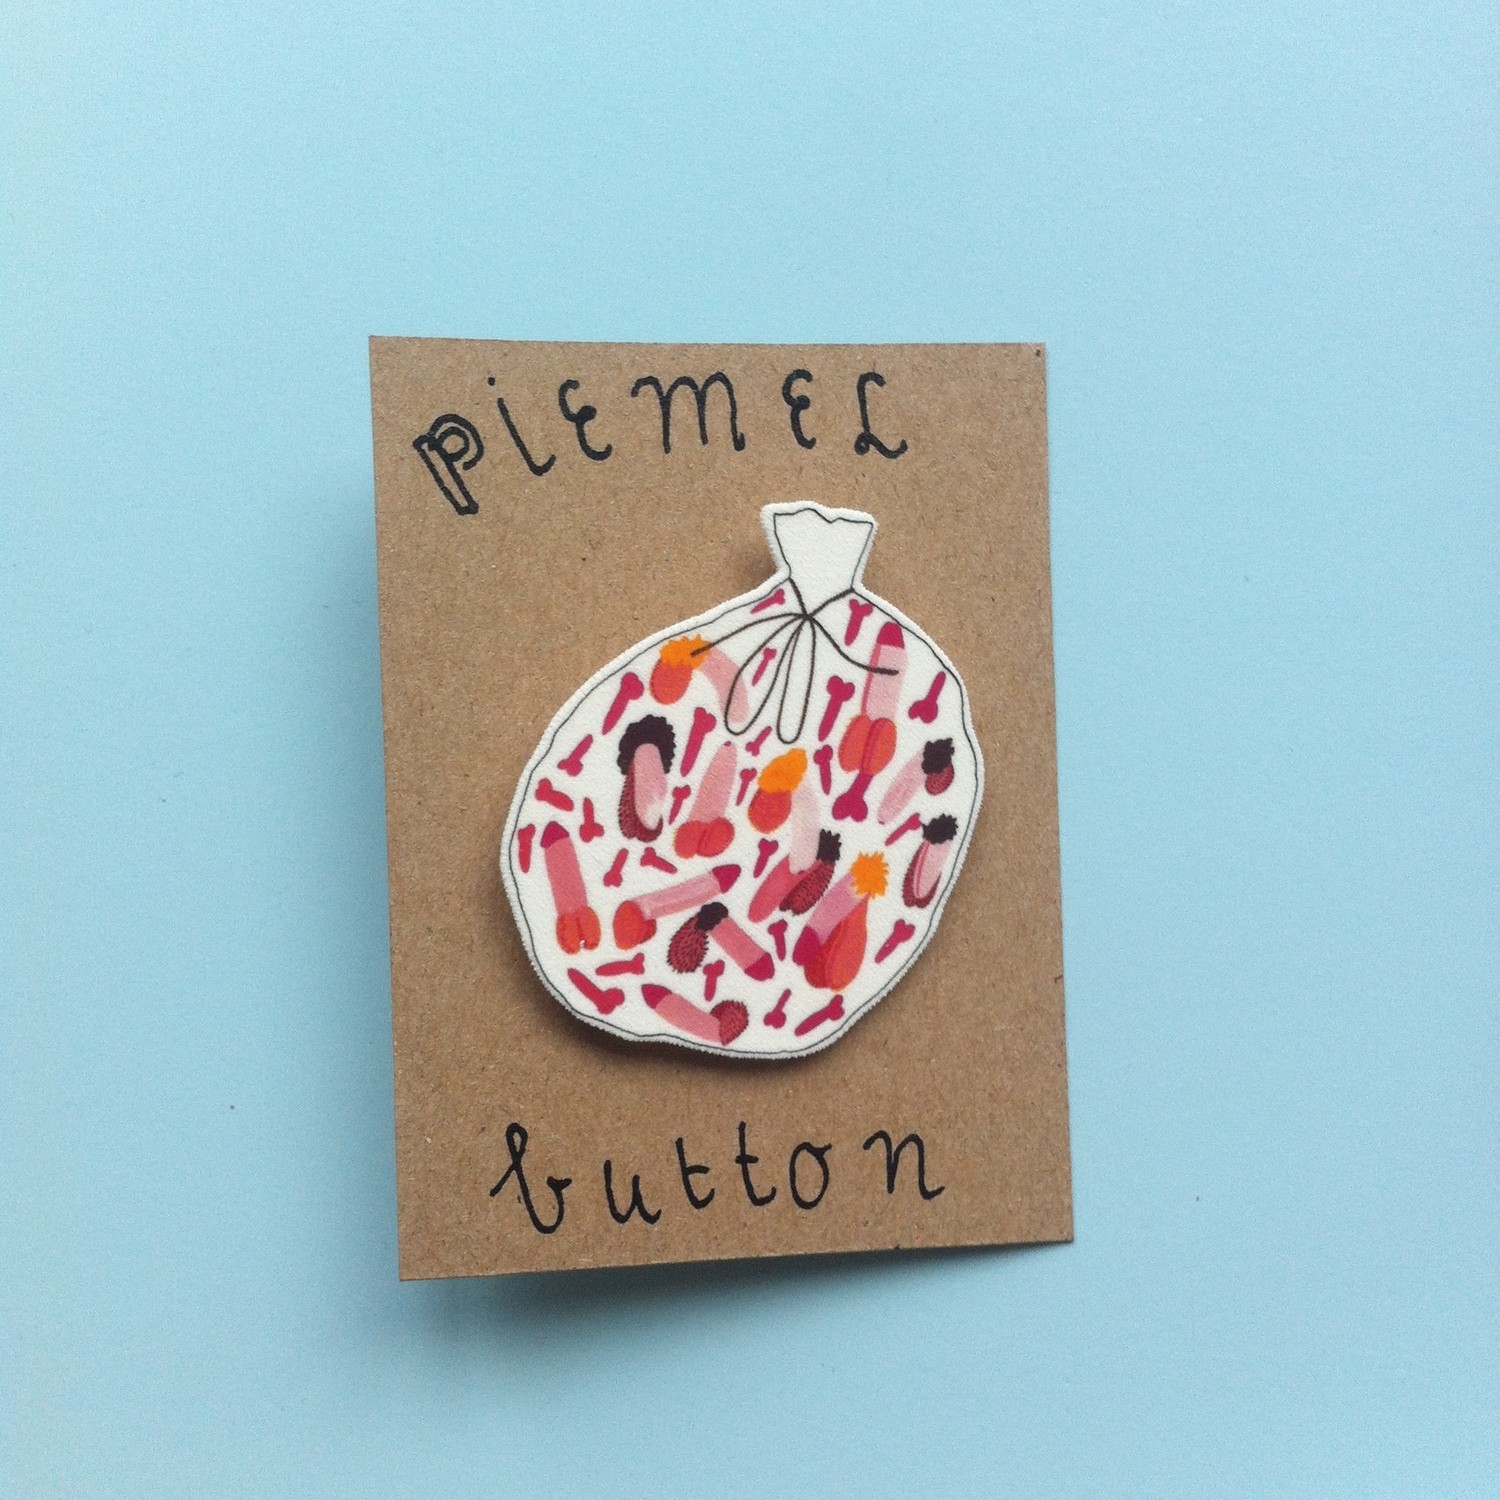 PIEMEL BUTTON
Shipping included!